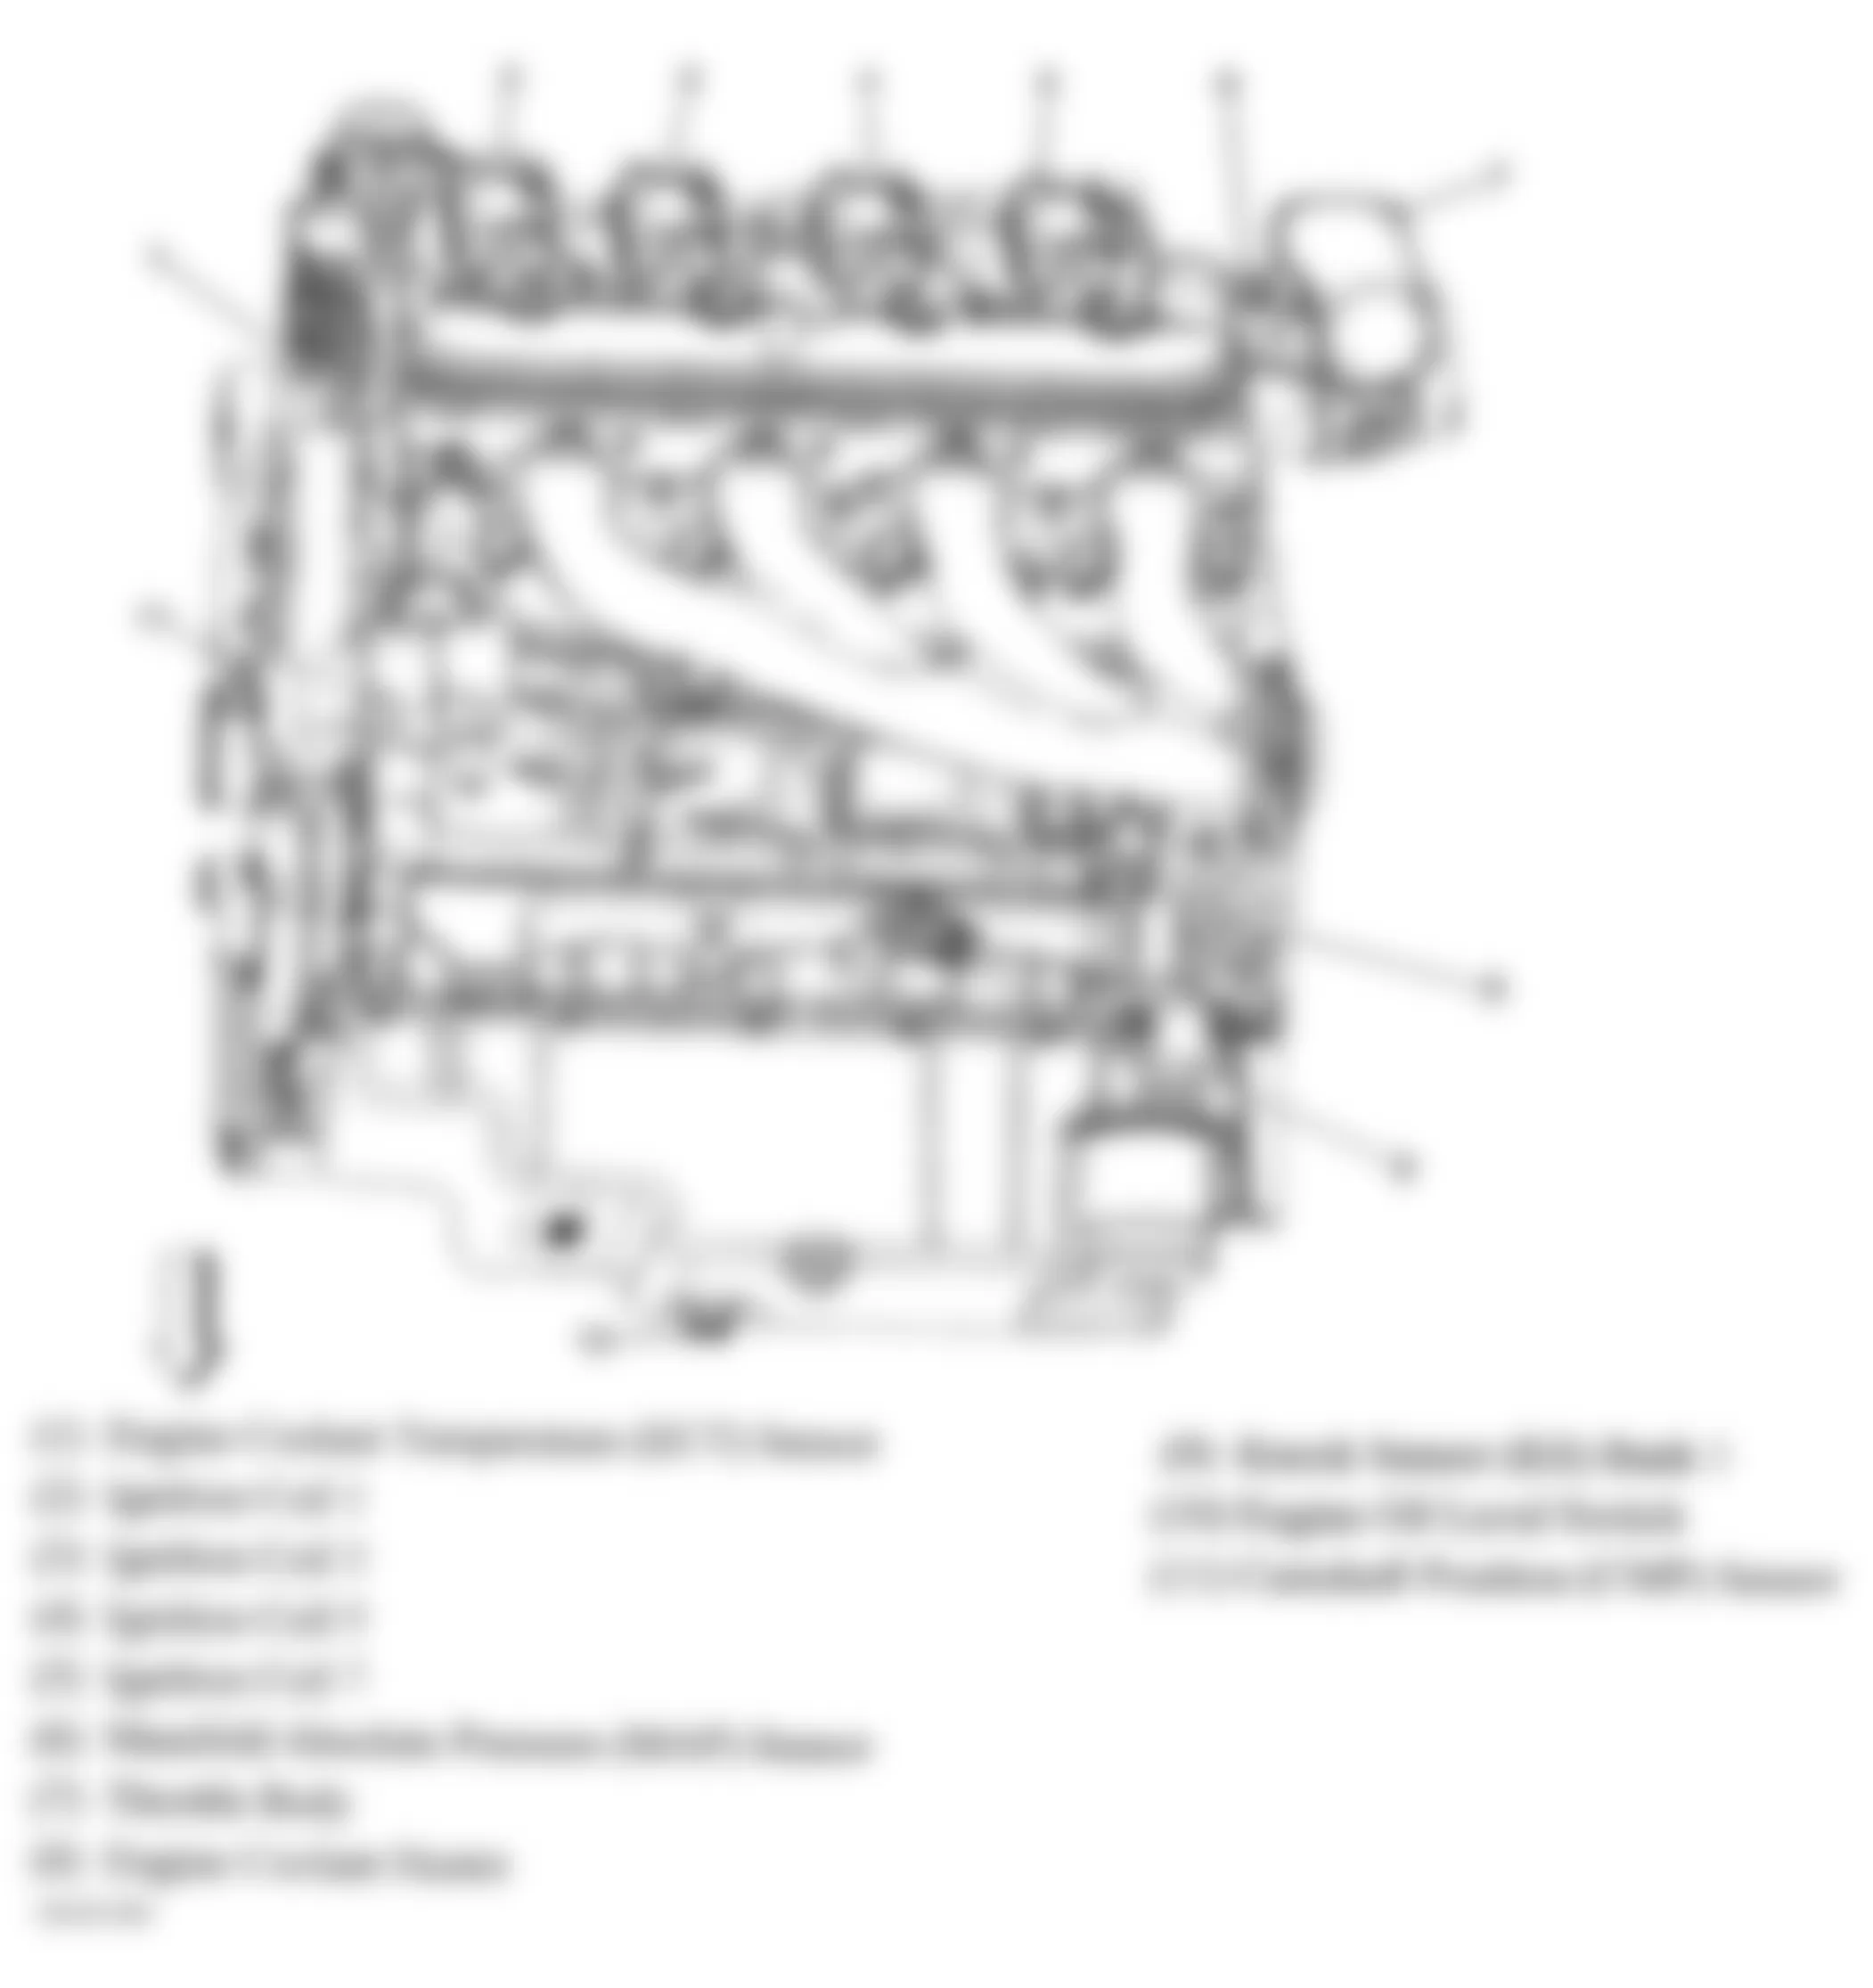 Chevrolet Impala LT 2009 - Component Locations -  Left Side Of Engine (5.3L)